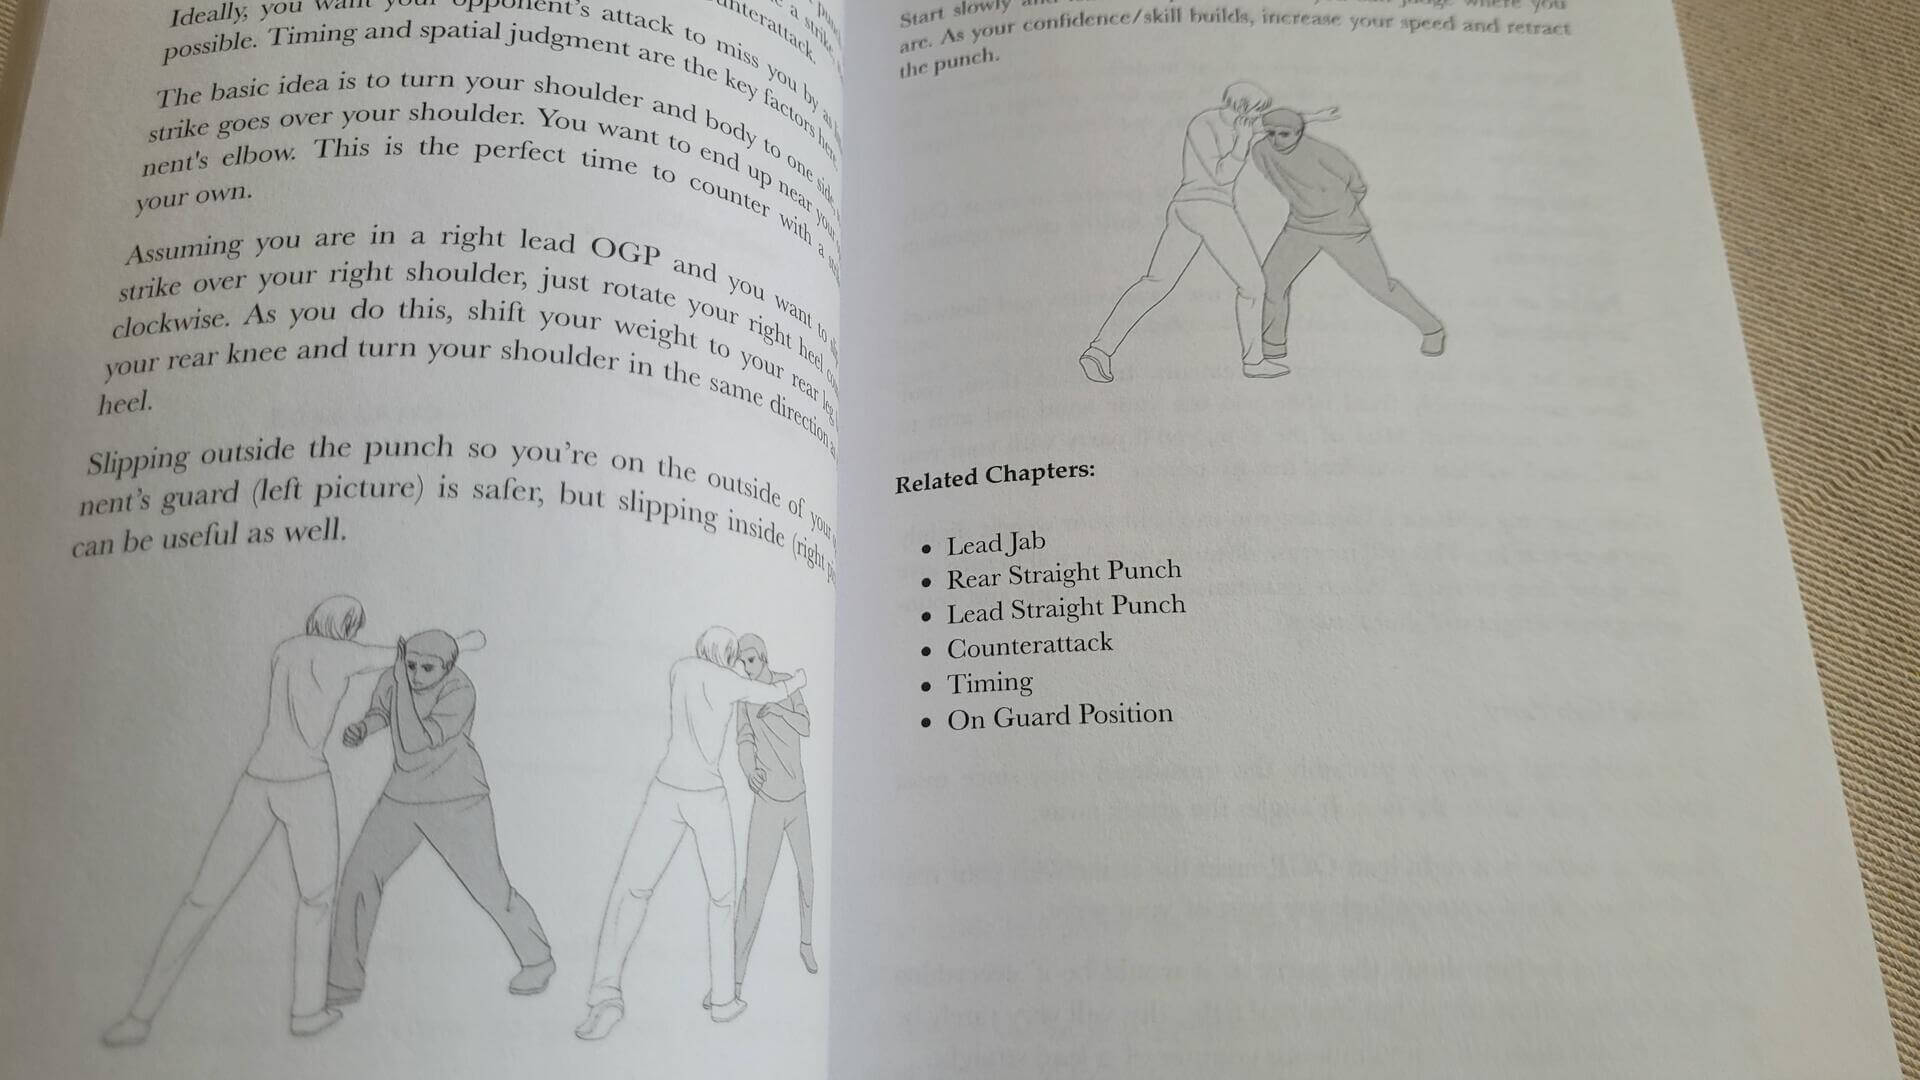 Bruce Lee's Jeet Kune Do book by by Sam Fury (Author), Diana Mangoba (Illustrator). ISBN 10: 1925979644 ISBN 13: 9781925979640 SF Nonfiction Books 2015